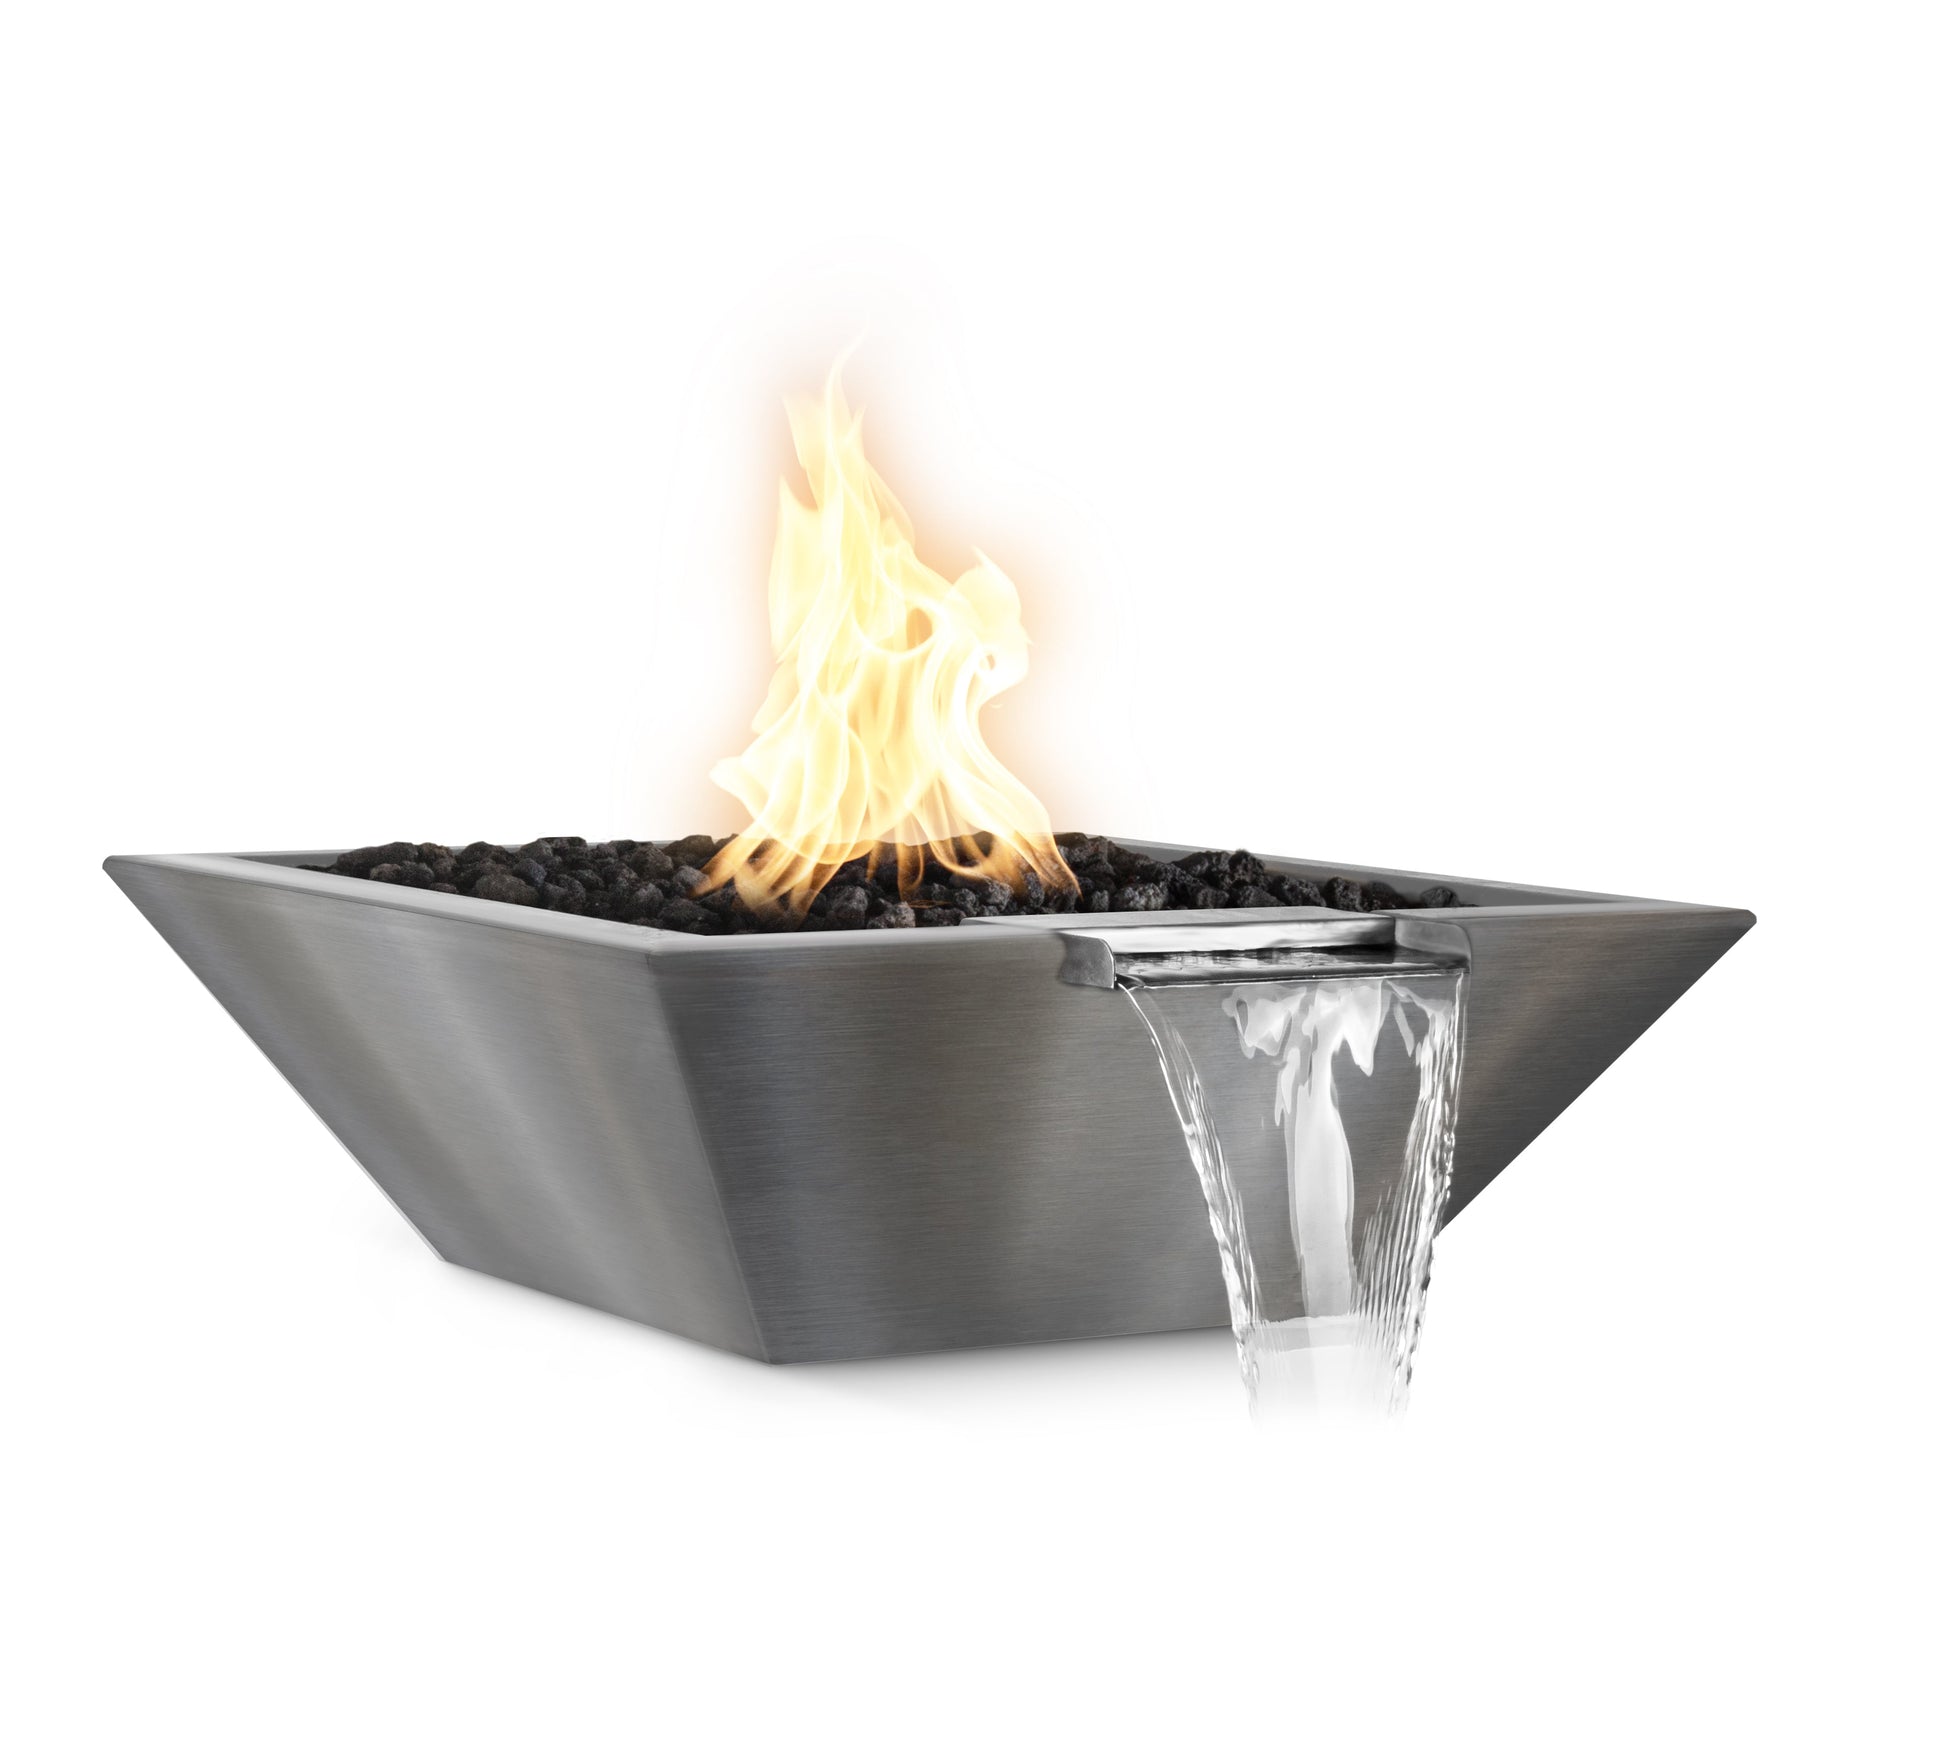 The Outdoor Plus Square Maya 24" Stainless Steel Natural Gas Fire & Water Bowl with Match Lit Ignition